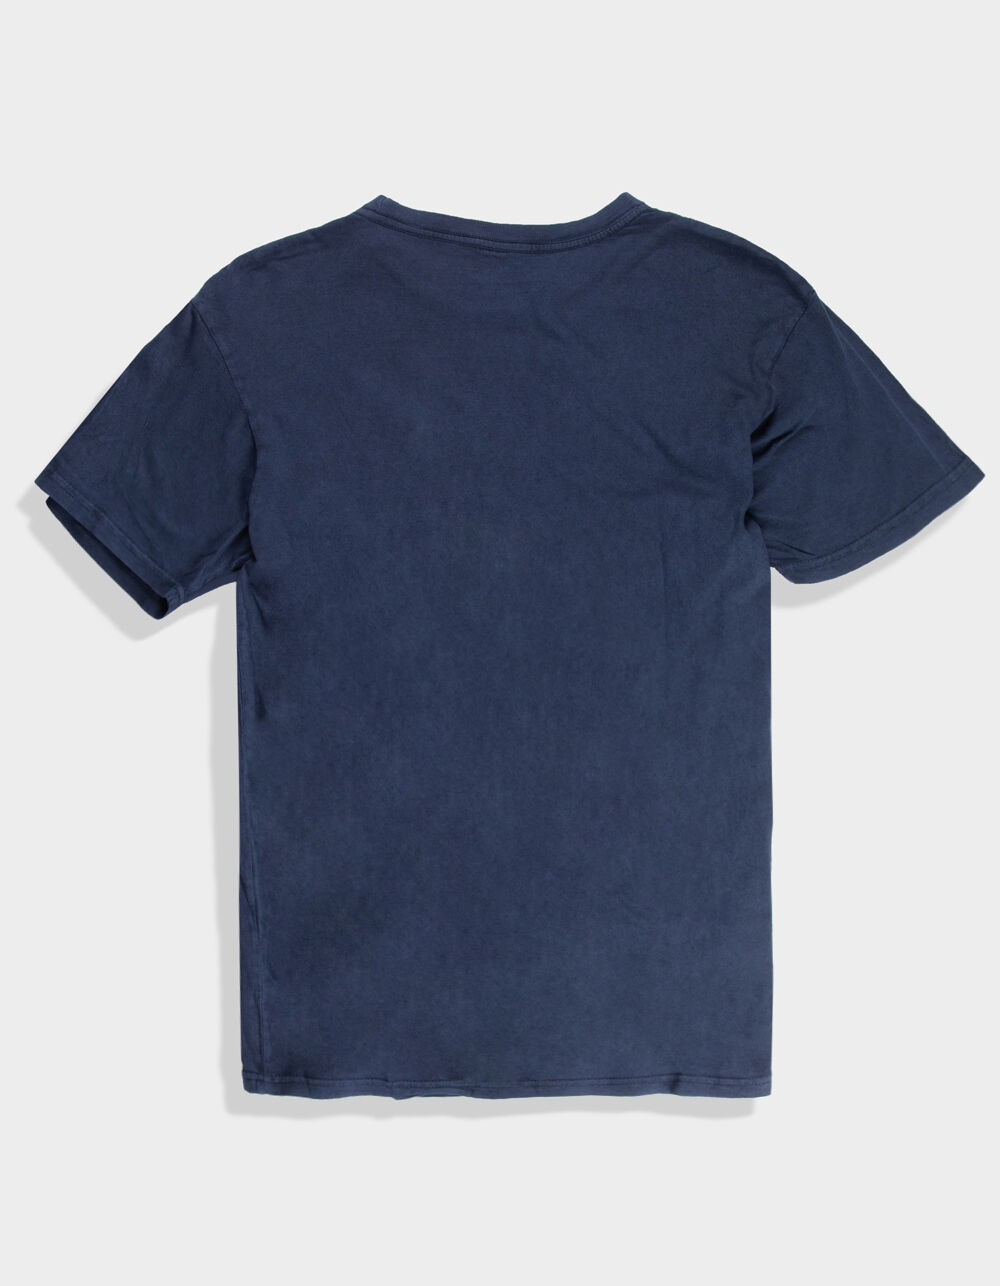 BARNEY COOLS Peace Palm Embroidered Mens Tee - NAVY | Tillys